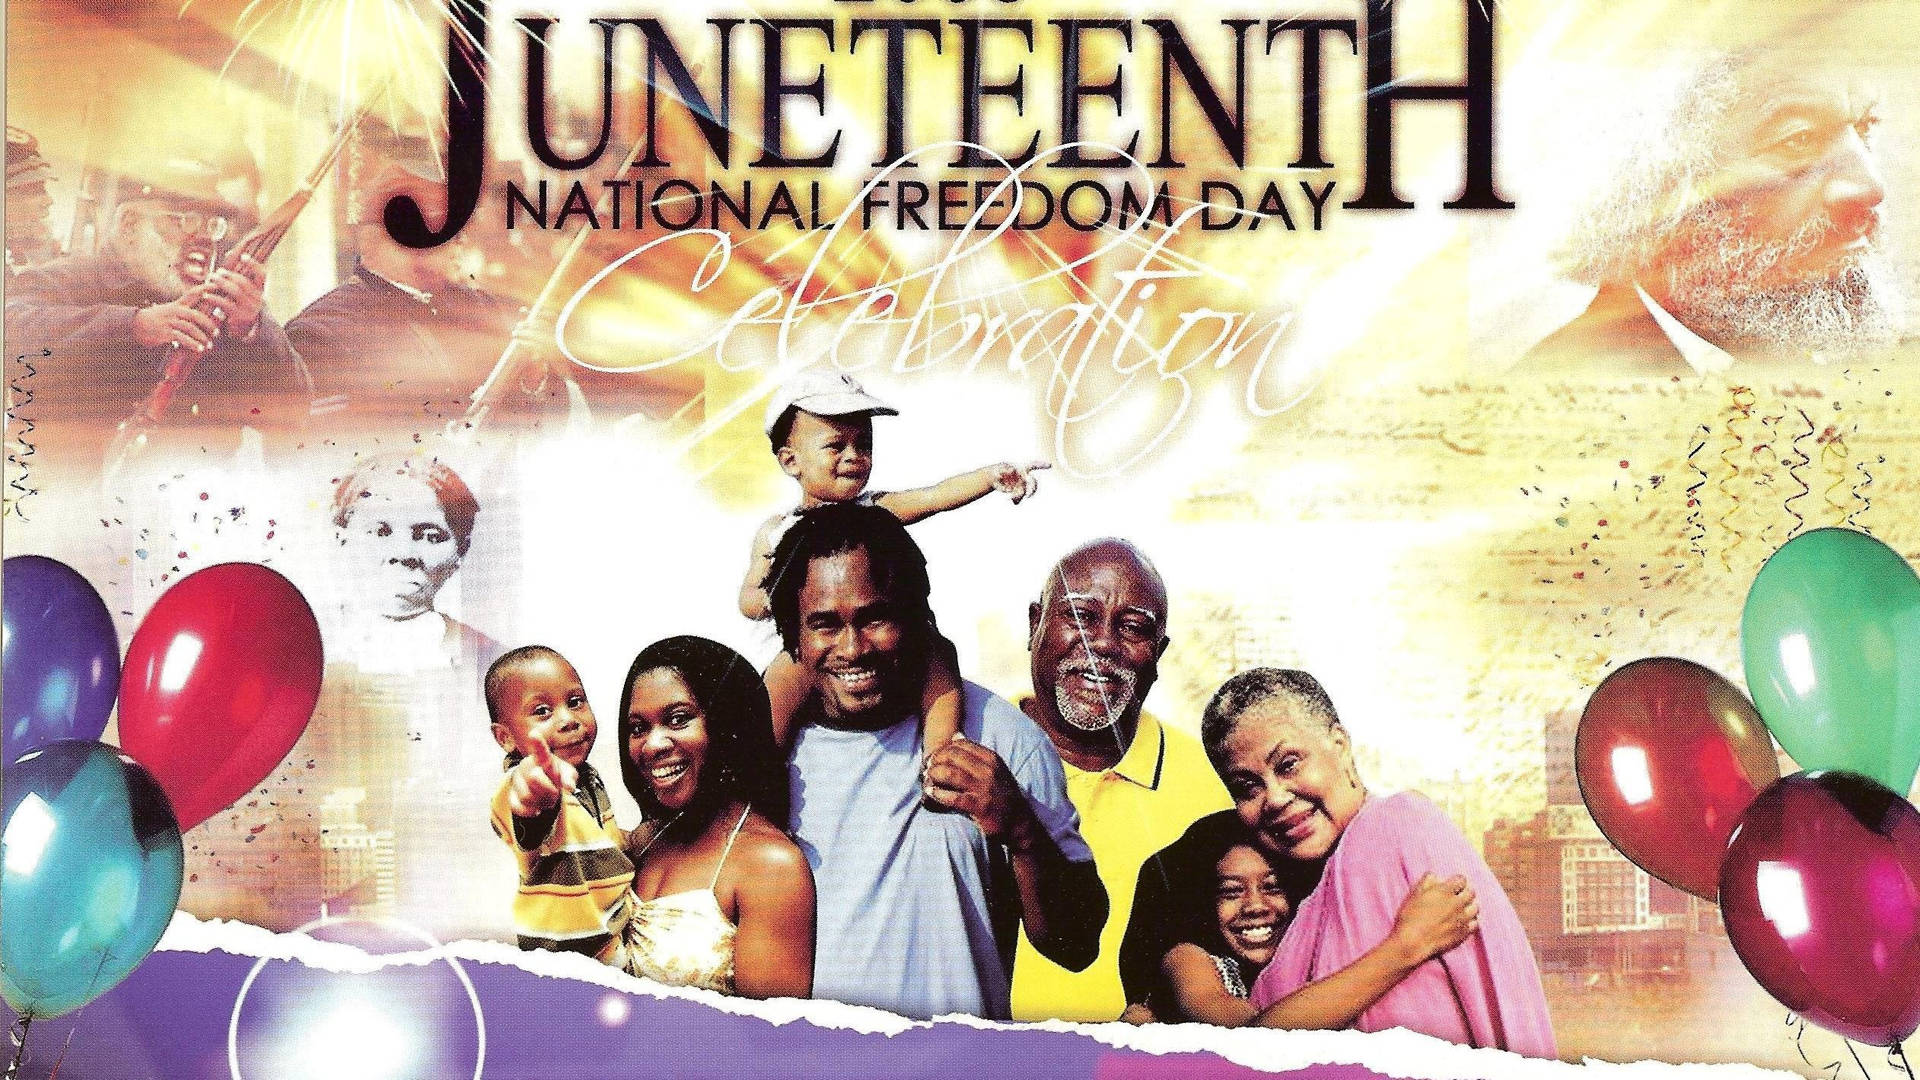 Juneteenth Happy Family Photograph Wallpaper